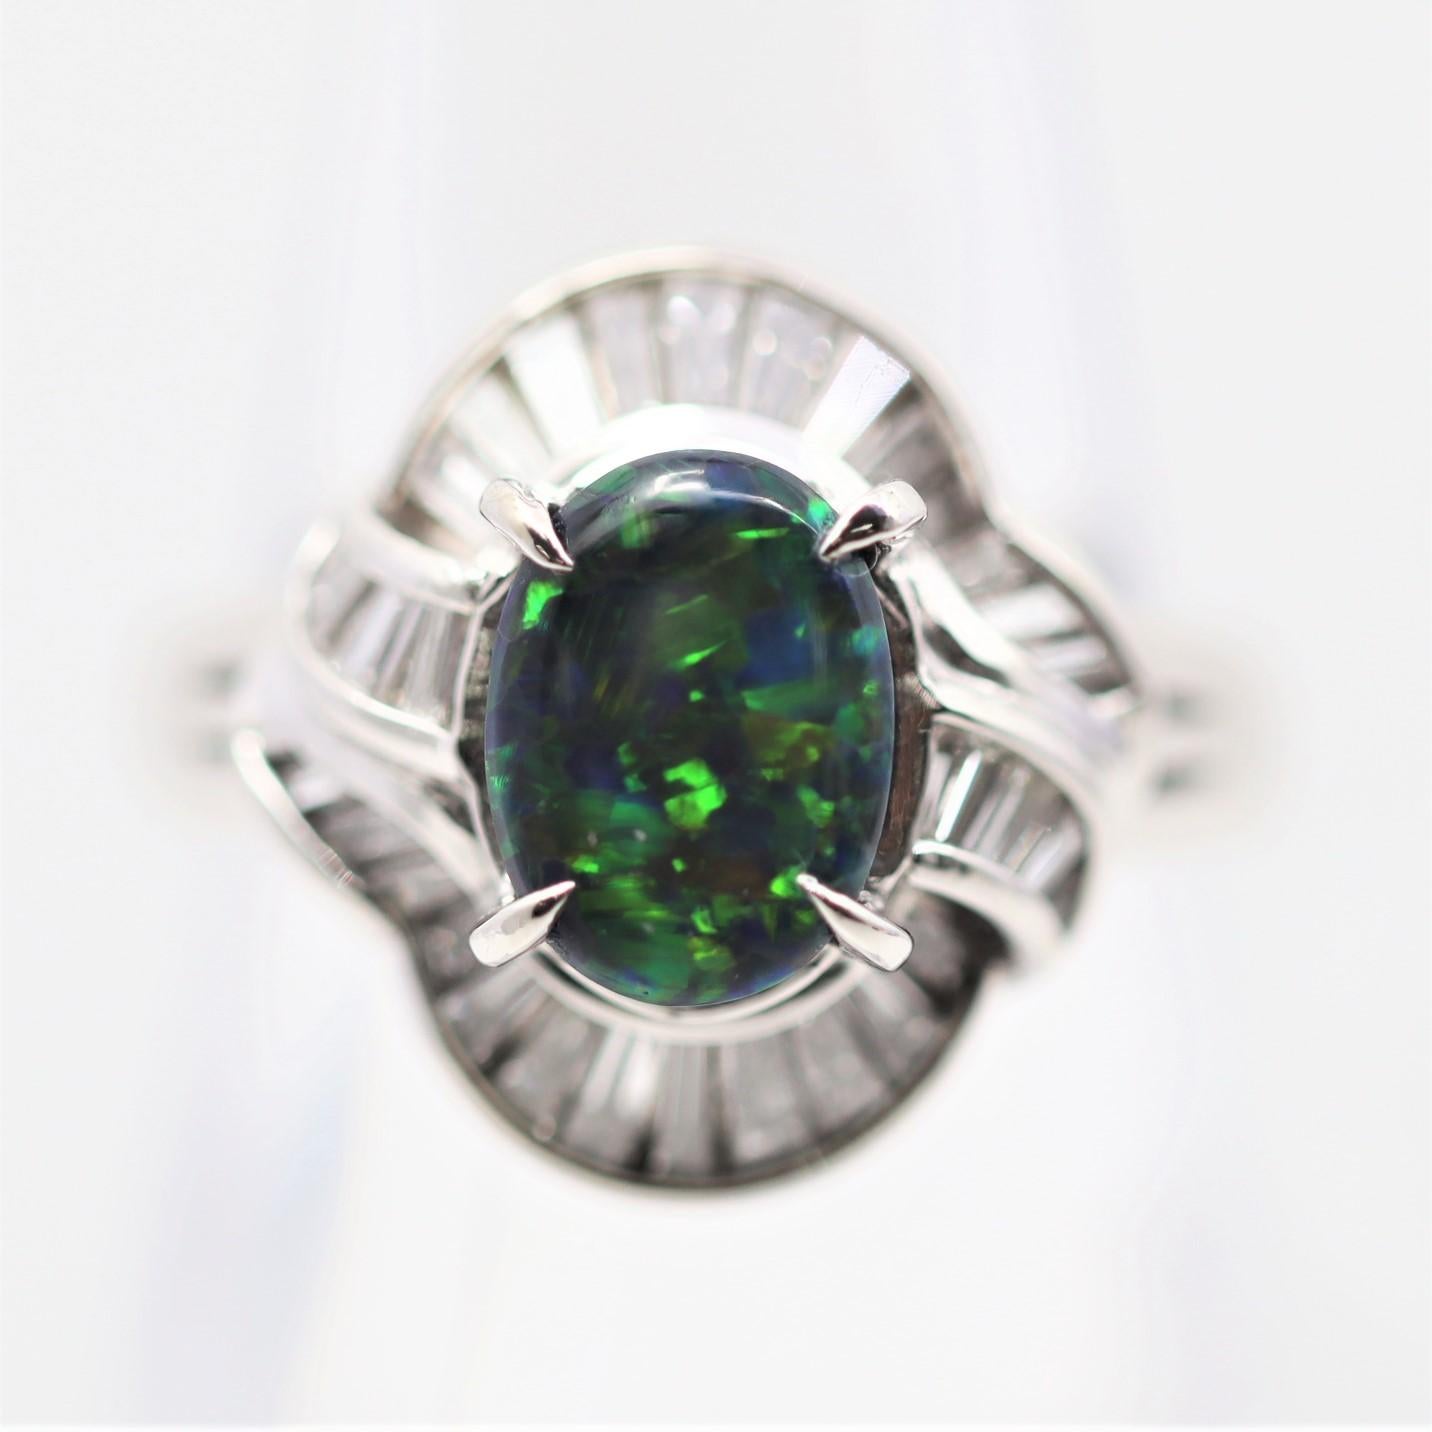 A sleek and elegant platinum ring featuring a 1.55 carat natural Australian black opal. It has great play of color as bright flashes of green, orange, and yellow dance across the dark black body color of the opal. It is complemented by 0.83 carat of